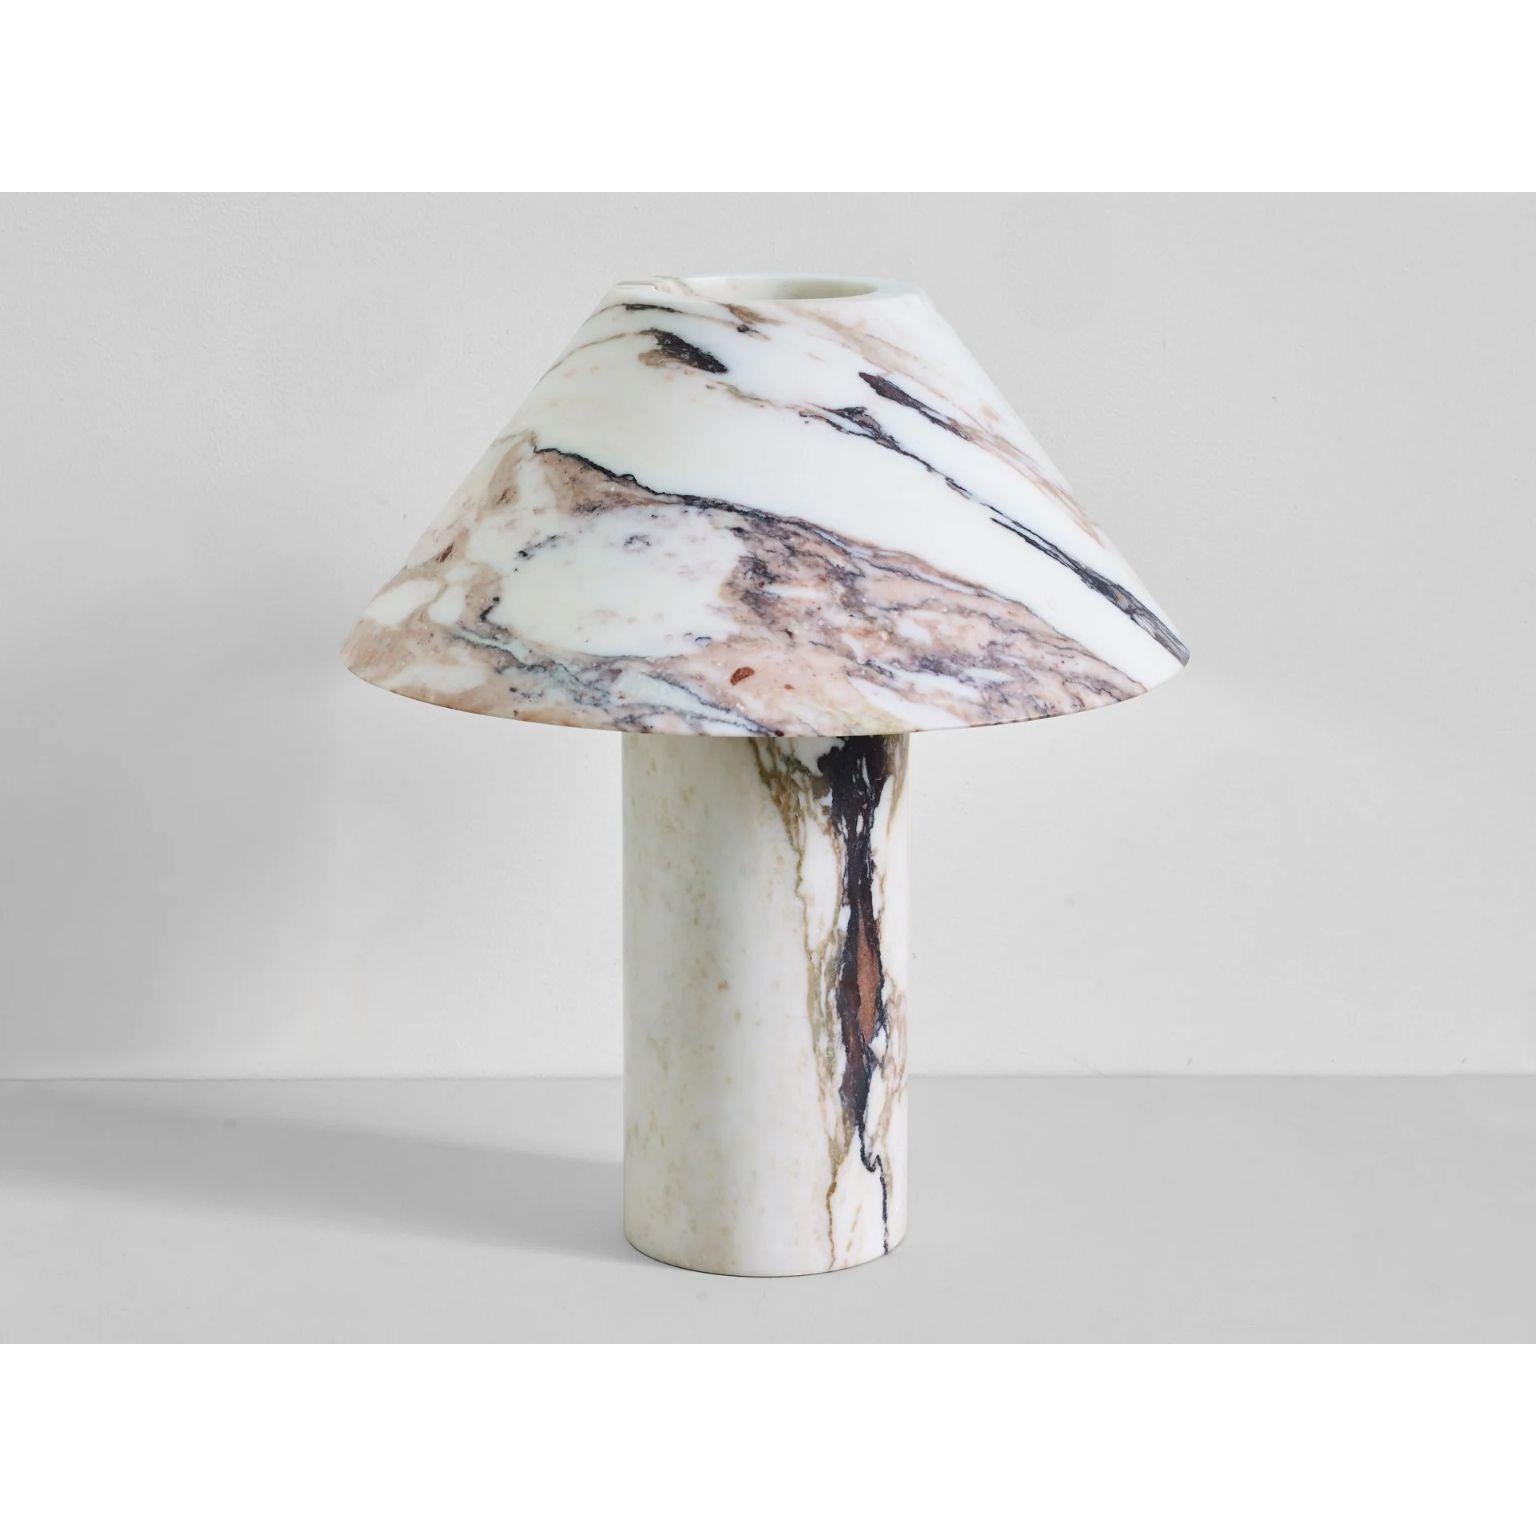 Large Calacatta Viola Pillar Lamp by Henry Wilson
Dimensions: D 35 x H 40 cm
Materials: Calacatta Viola Marble

Pillar Lamp is hewn from two pieces of solid Calacatta Viola Marble. As stone is a natural material, variations of the pattern will occur